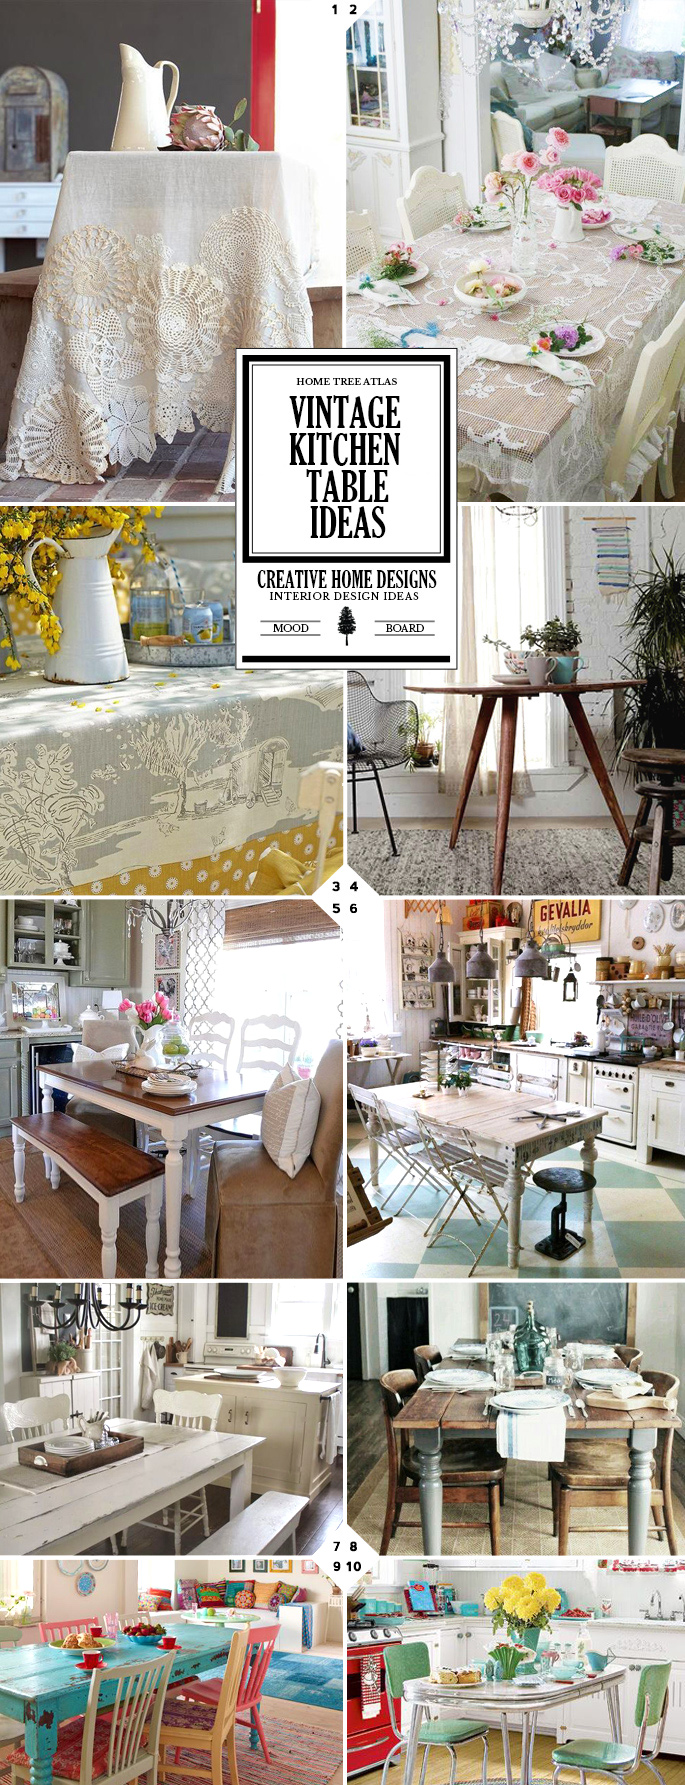 Style Guide: 10 Vintage Kitchen Table Ideas and Designs